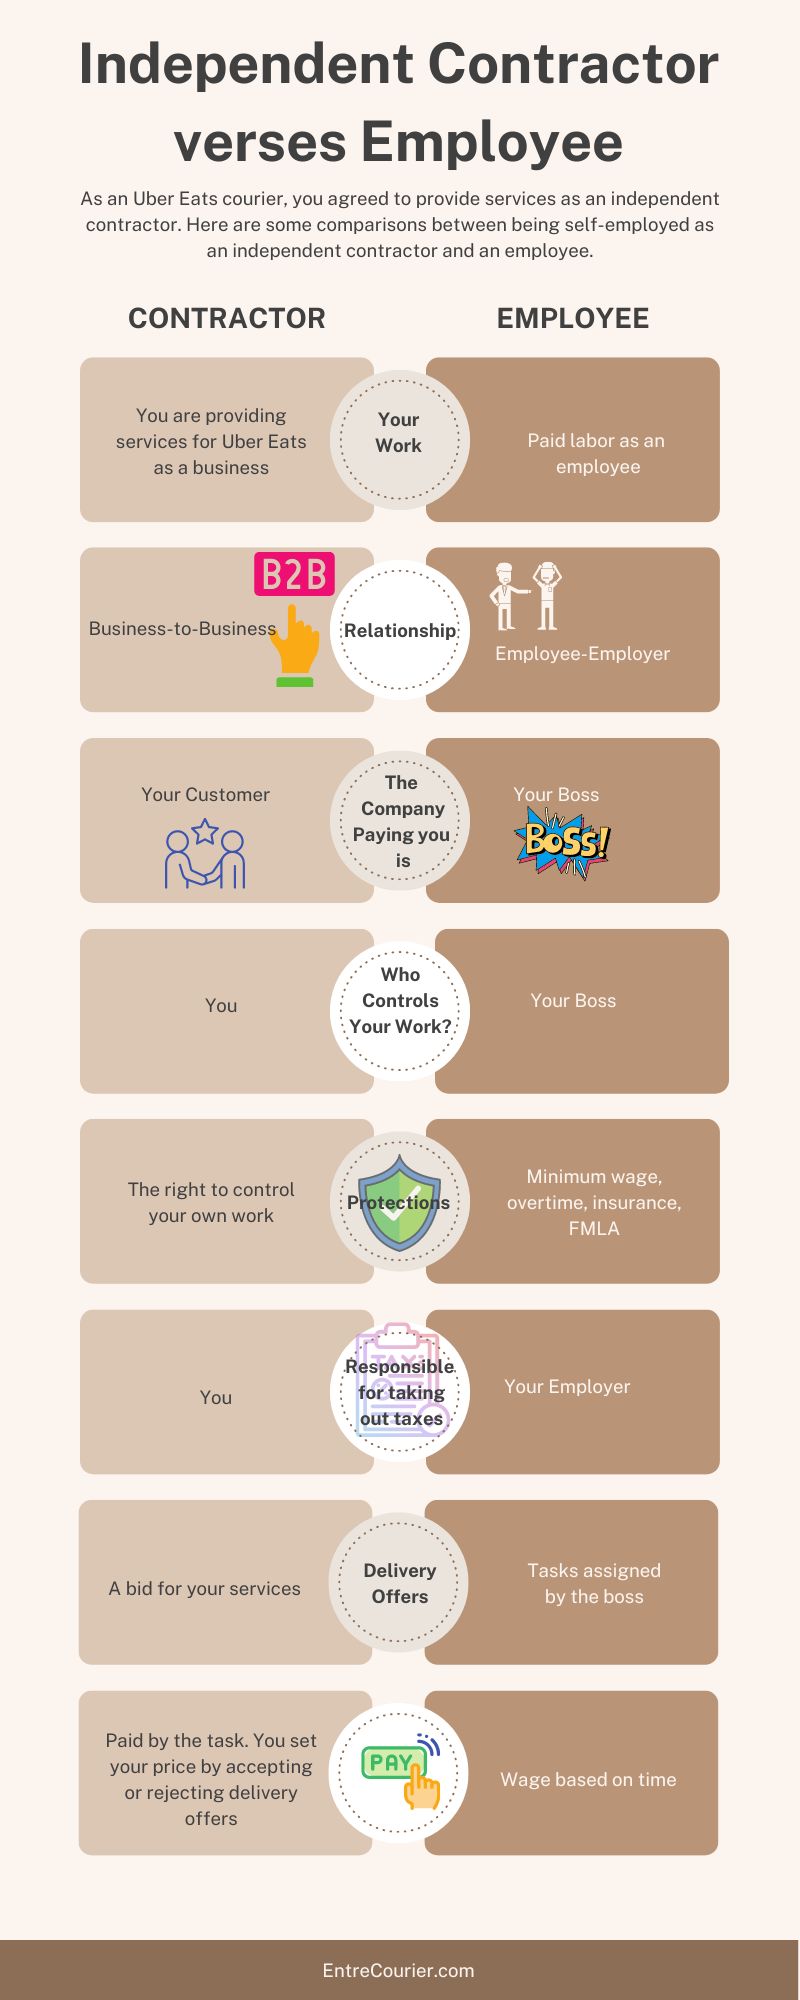 Infographic pointing out differences between an independent contractor (self-employeed) and being an employee.